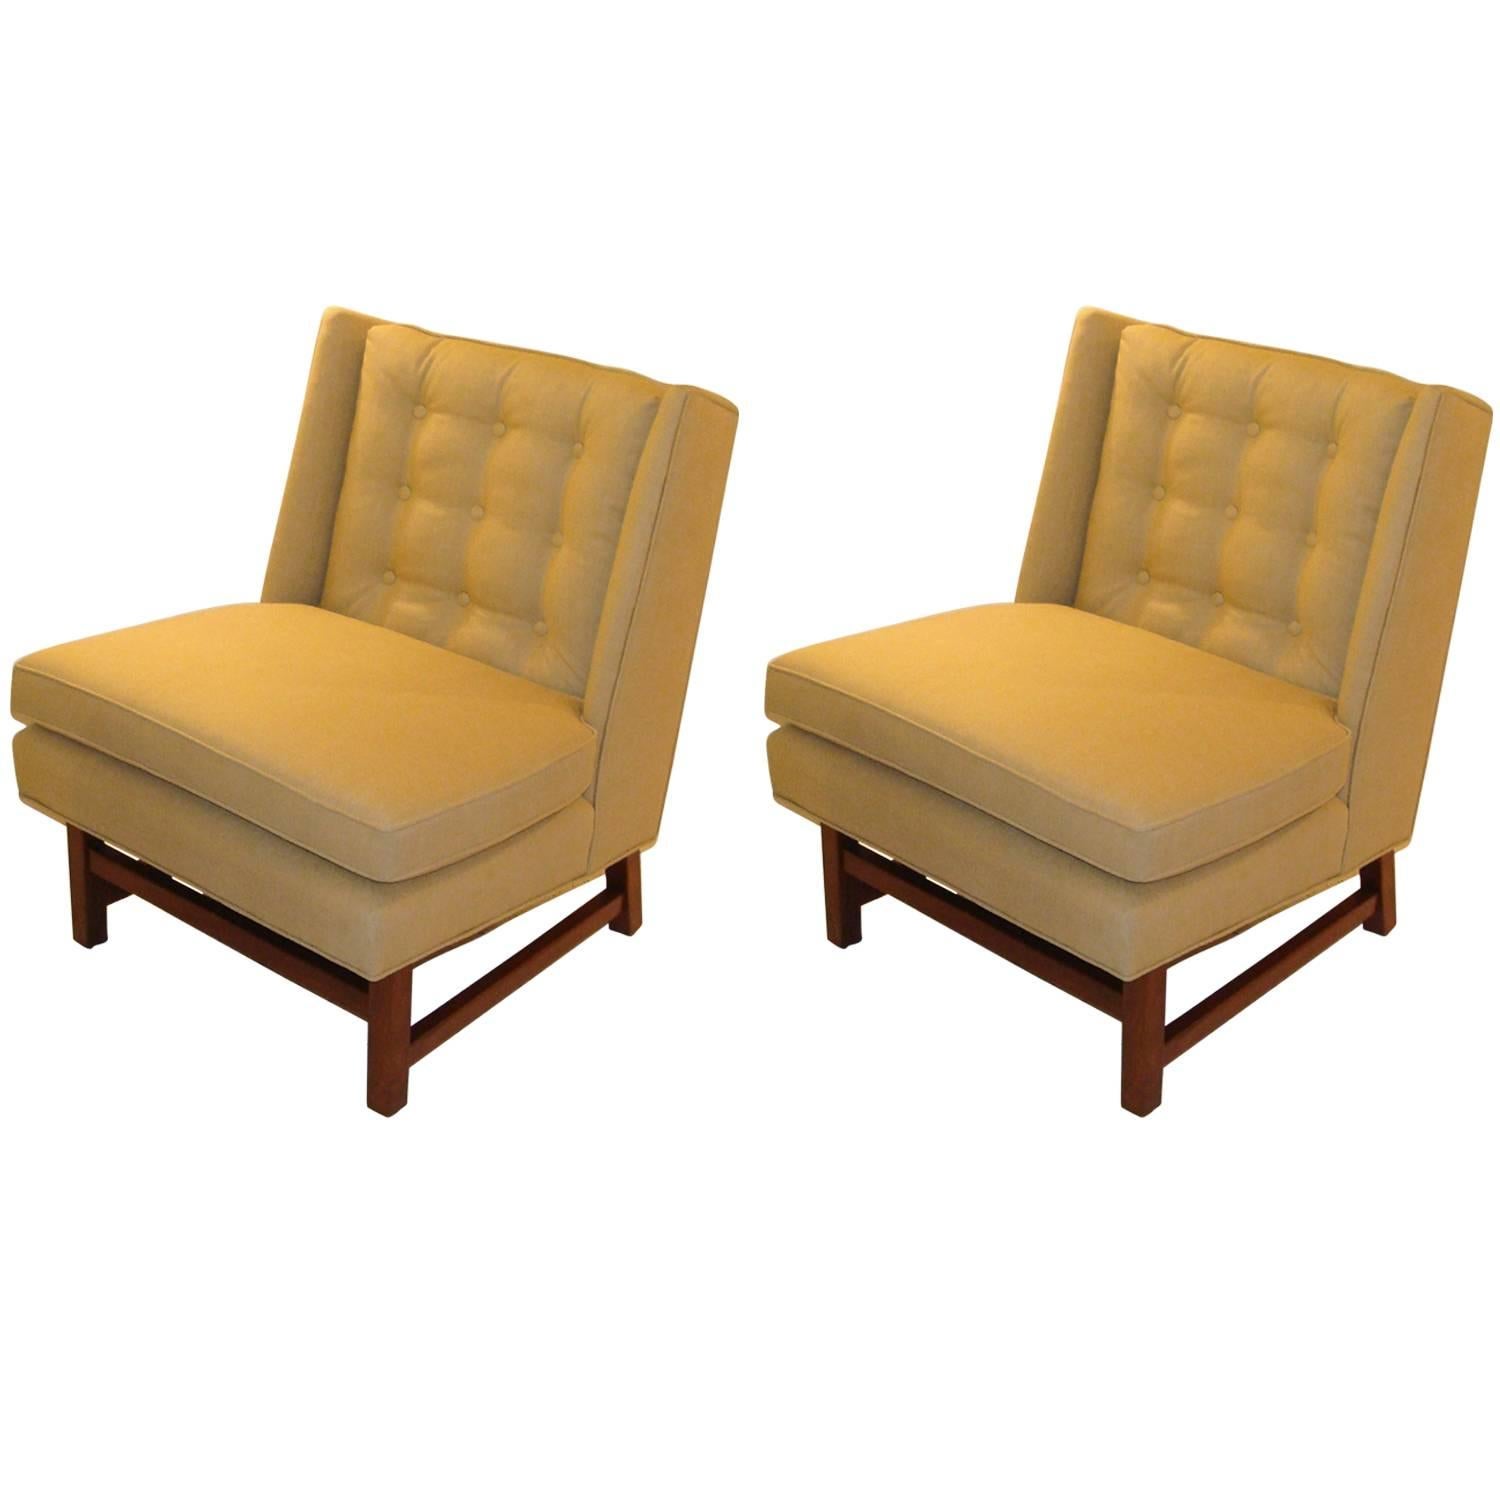 Pair of Edward Wormley Style Mid-Century Chairs